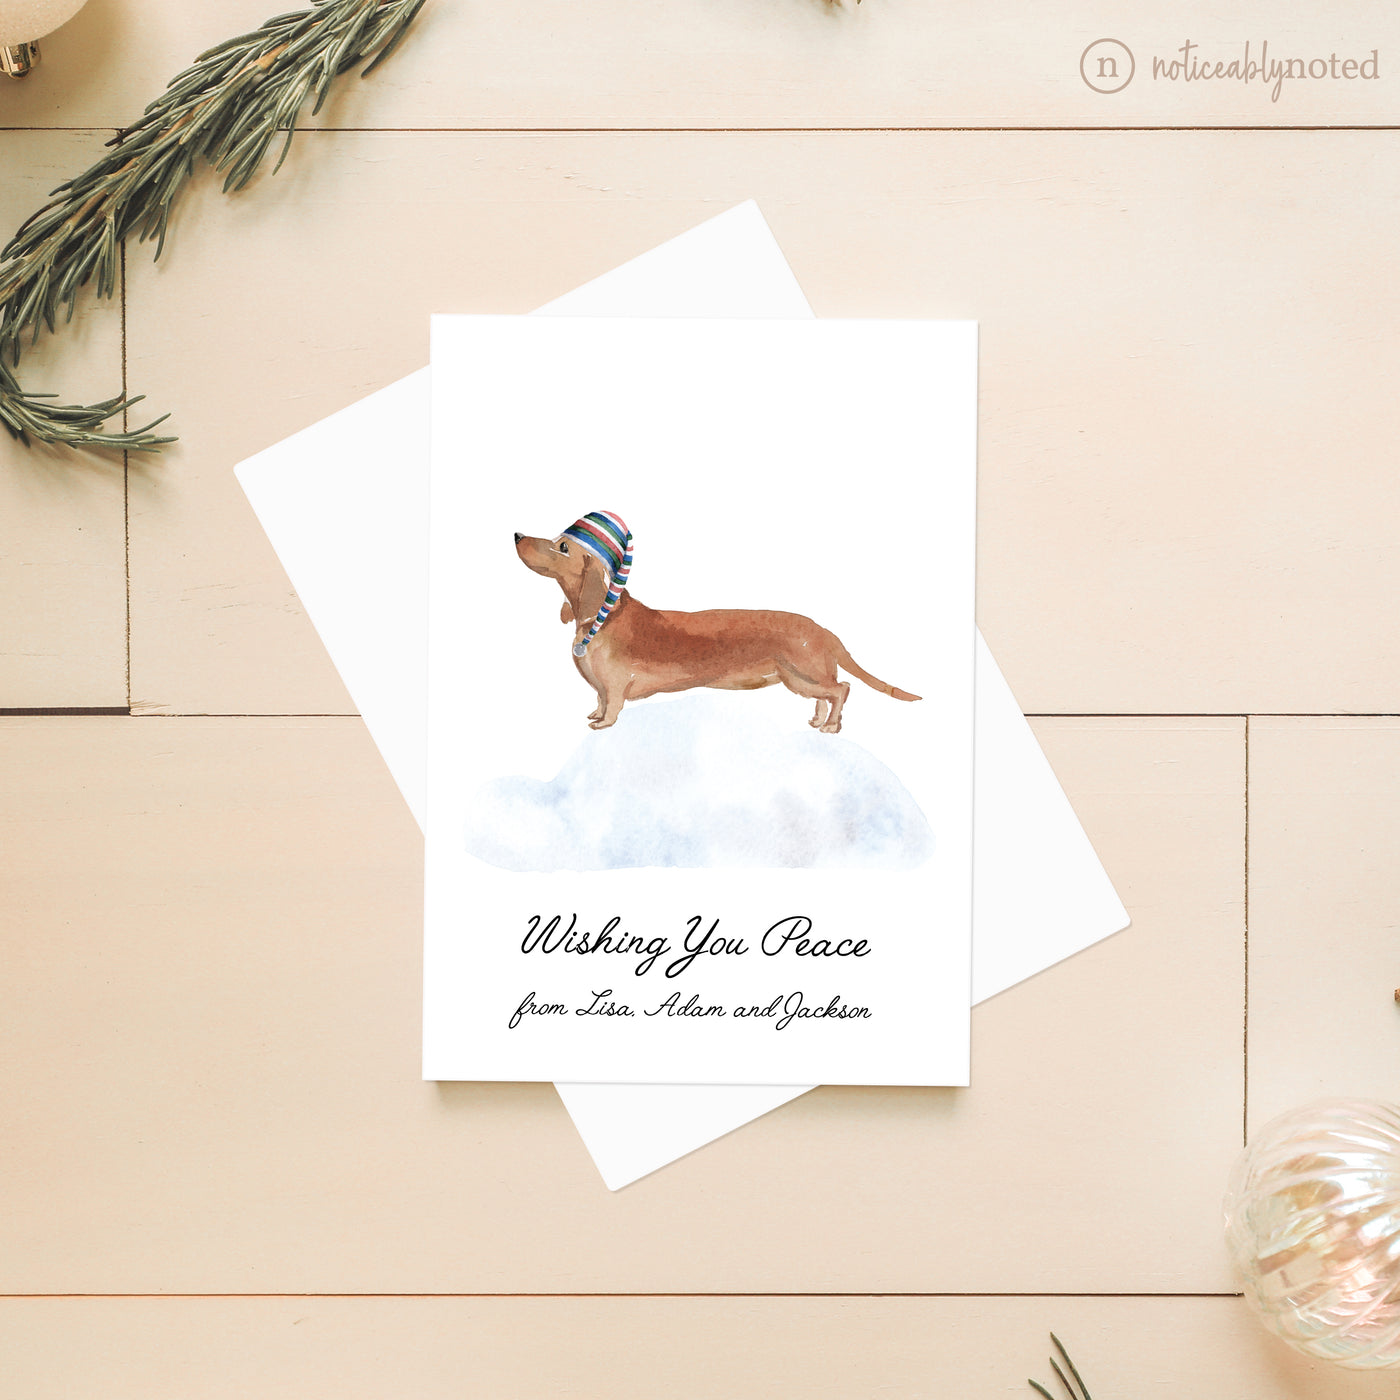 Dachshund Dog Christmas Cards | Noticeably Noted